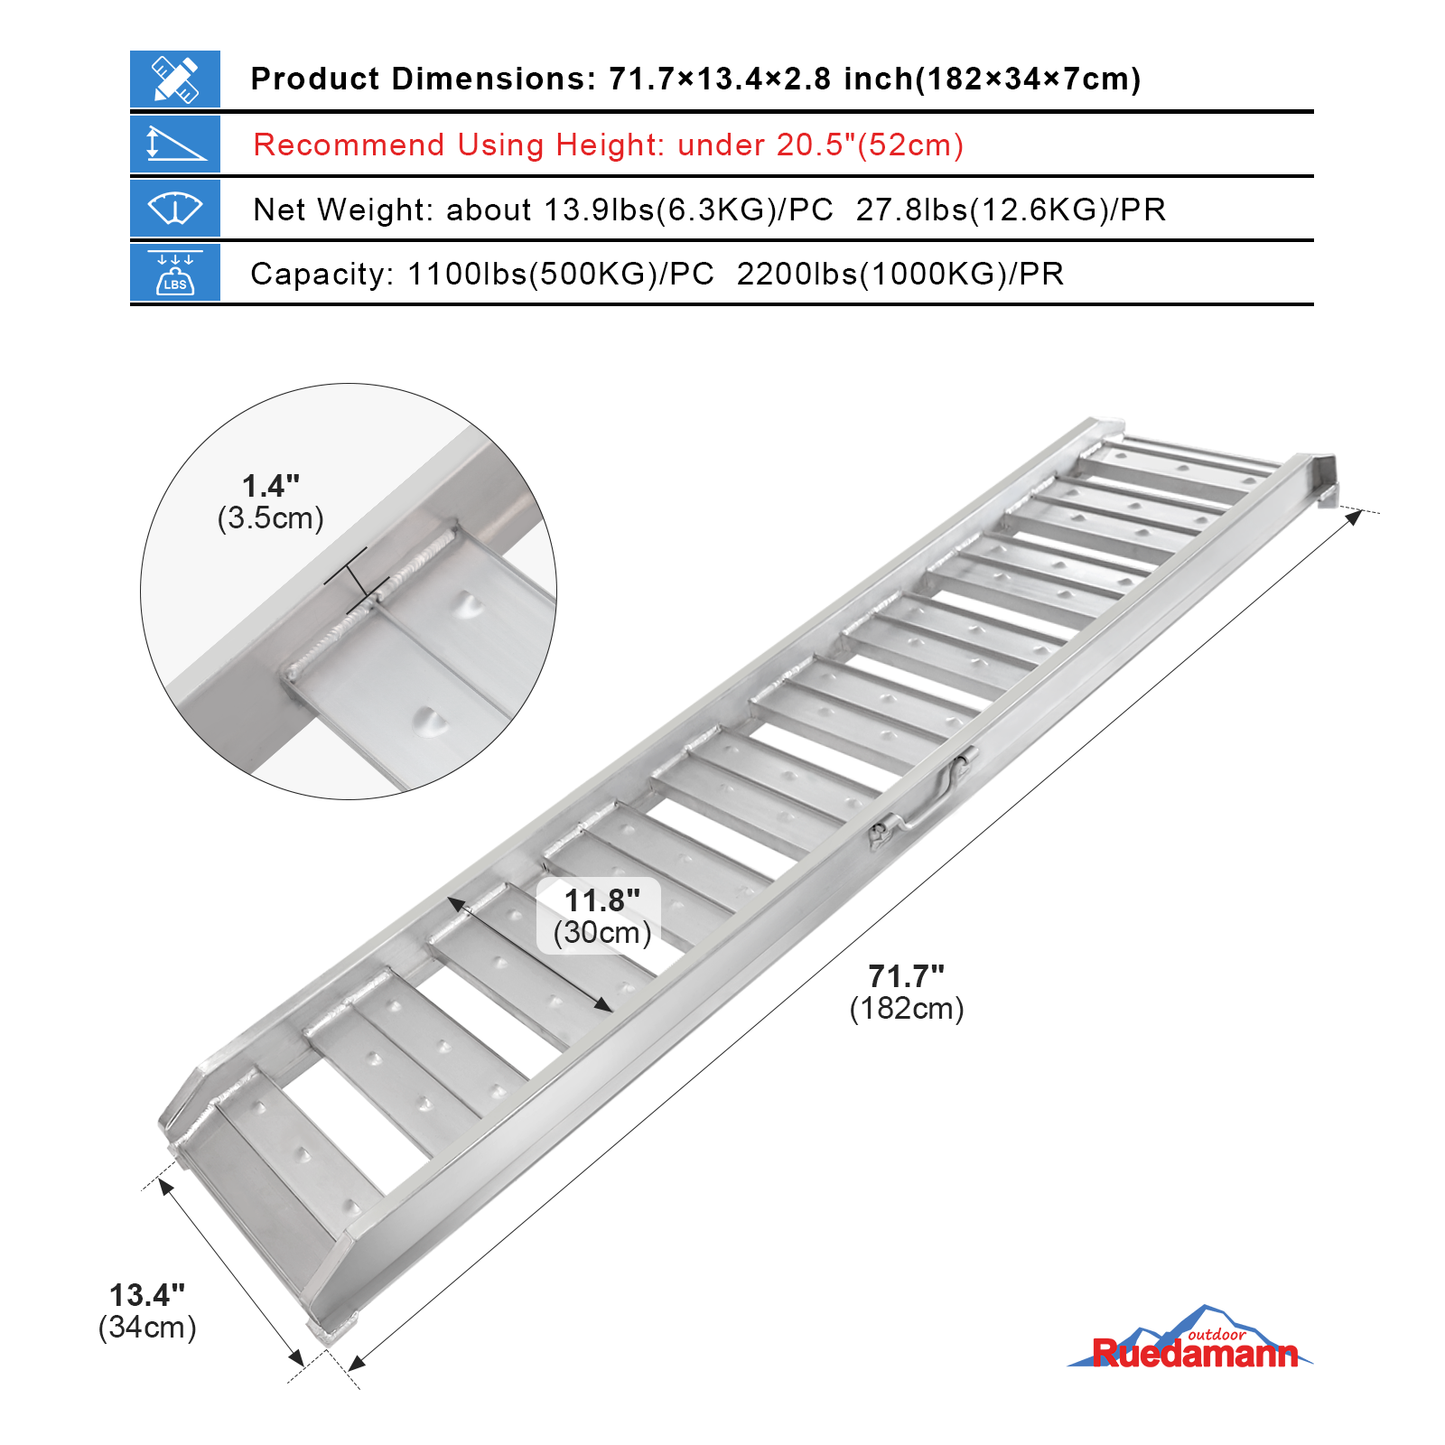 Ruedamann 4Ft Aluminum Loading Ramp 3520 Lbs Capacity Hook End Car Ramp with Load Straps Pack of 2